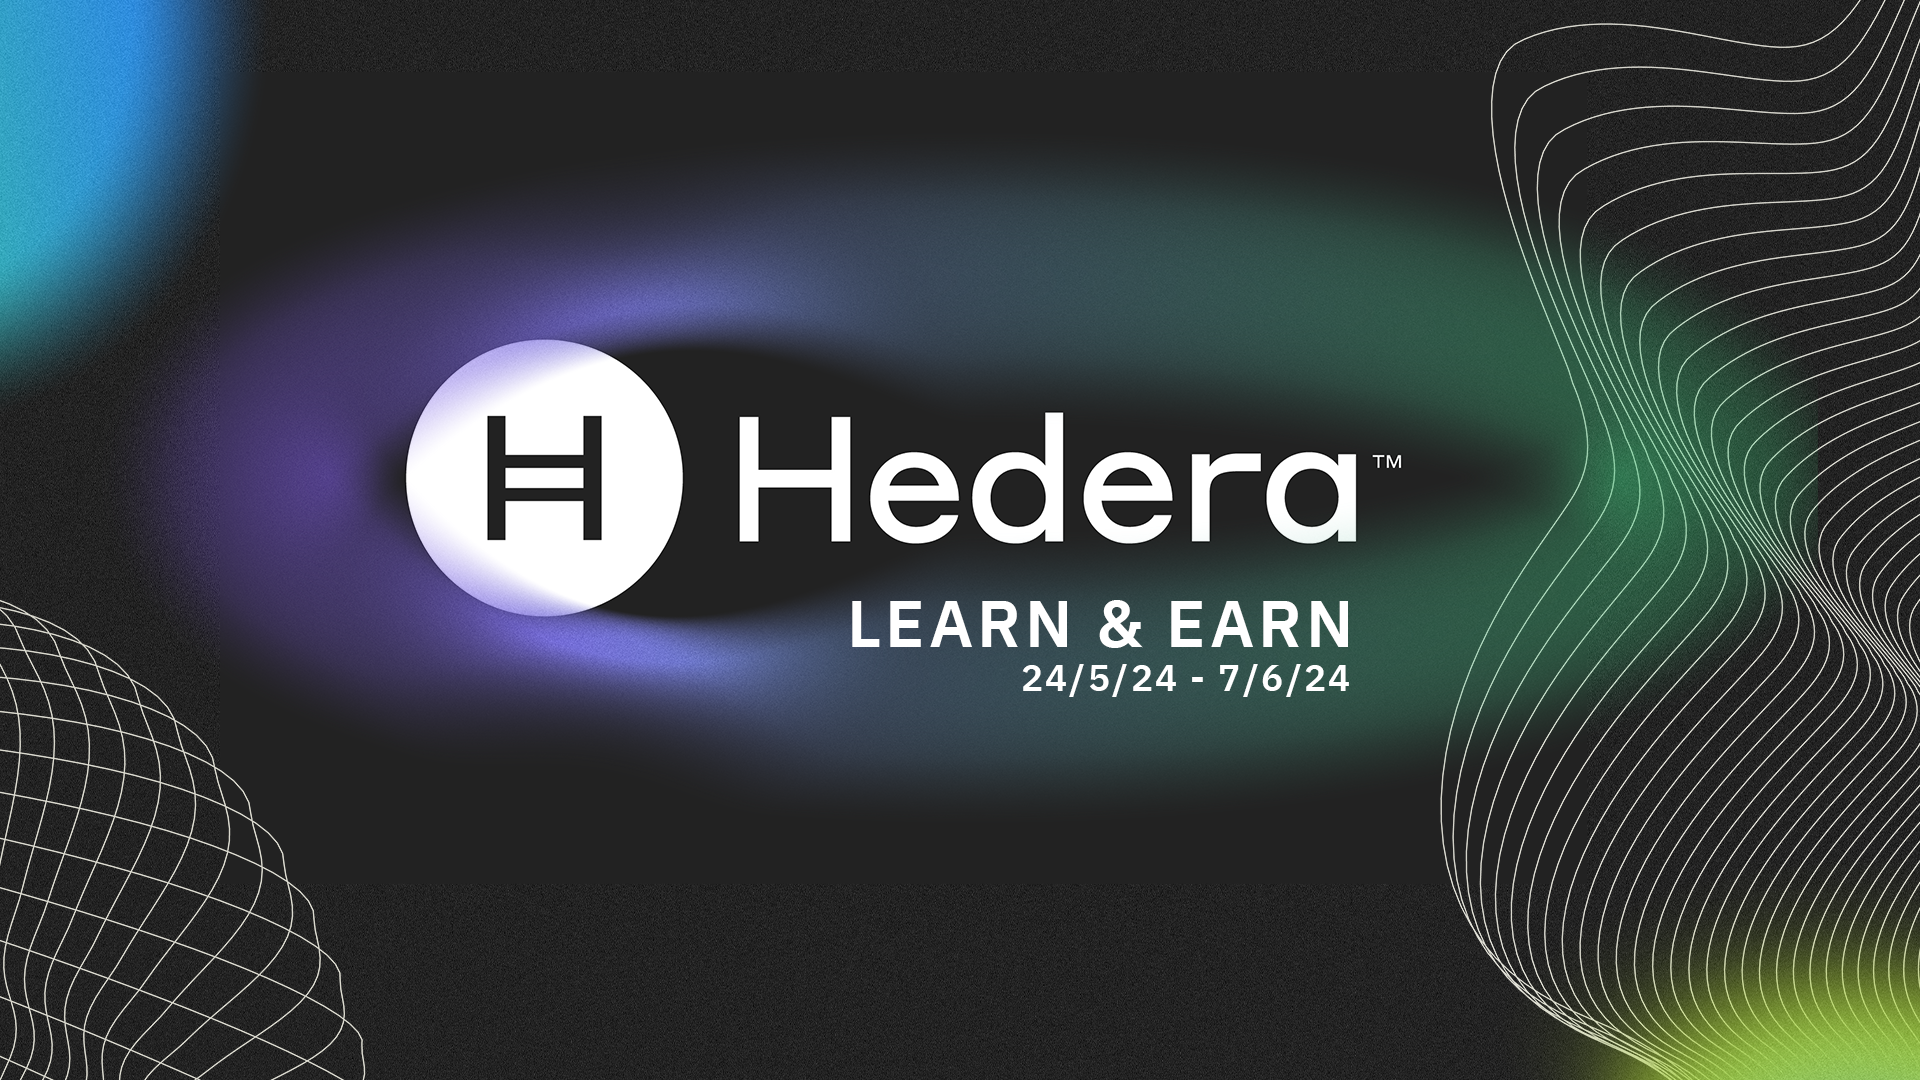 Learn & Earn about Hedera